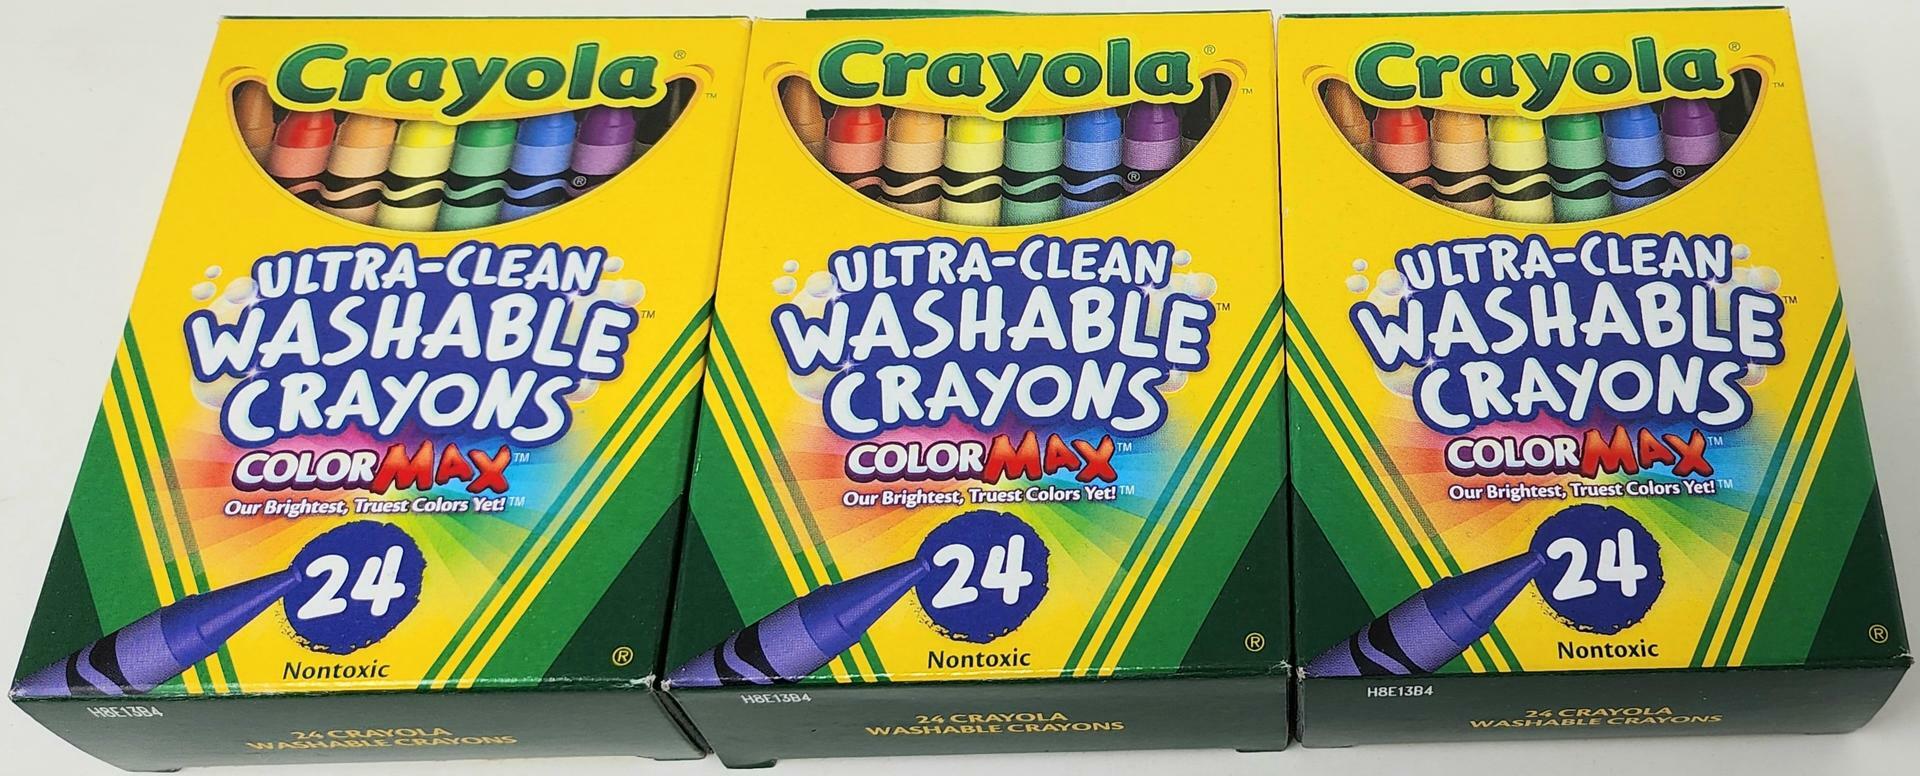 Set of 3 |Crayola Ultra-Clean Washable Crayons 24 per pack